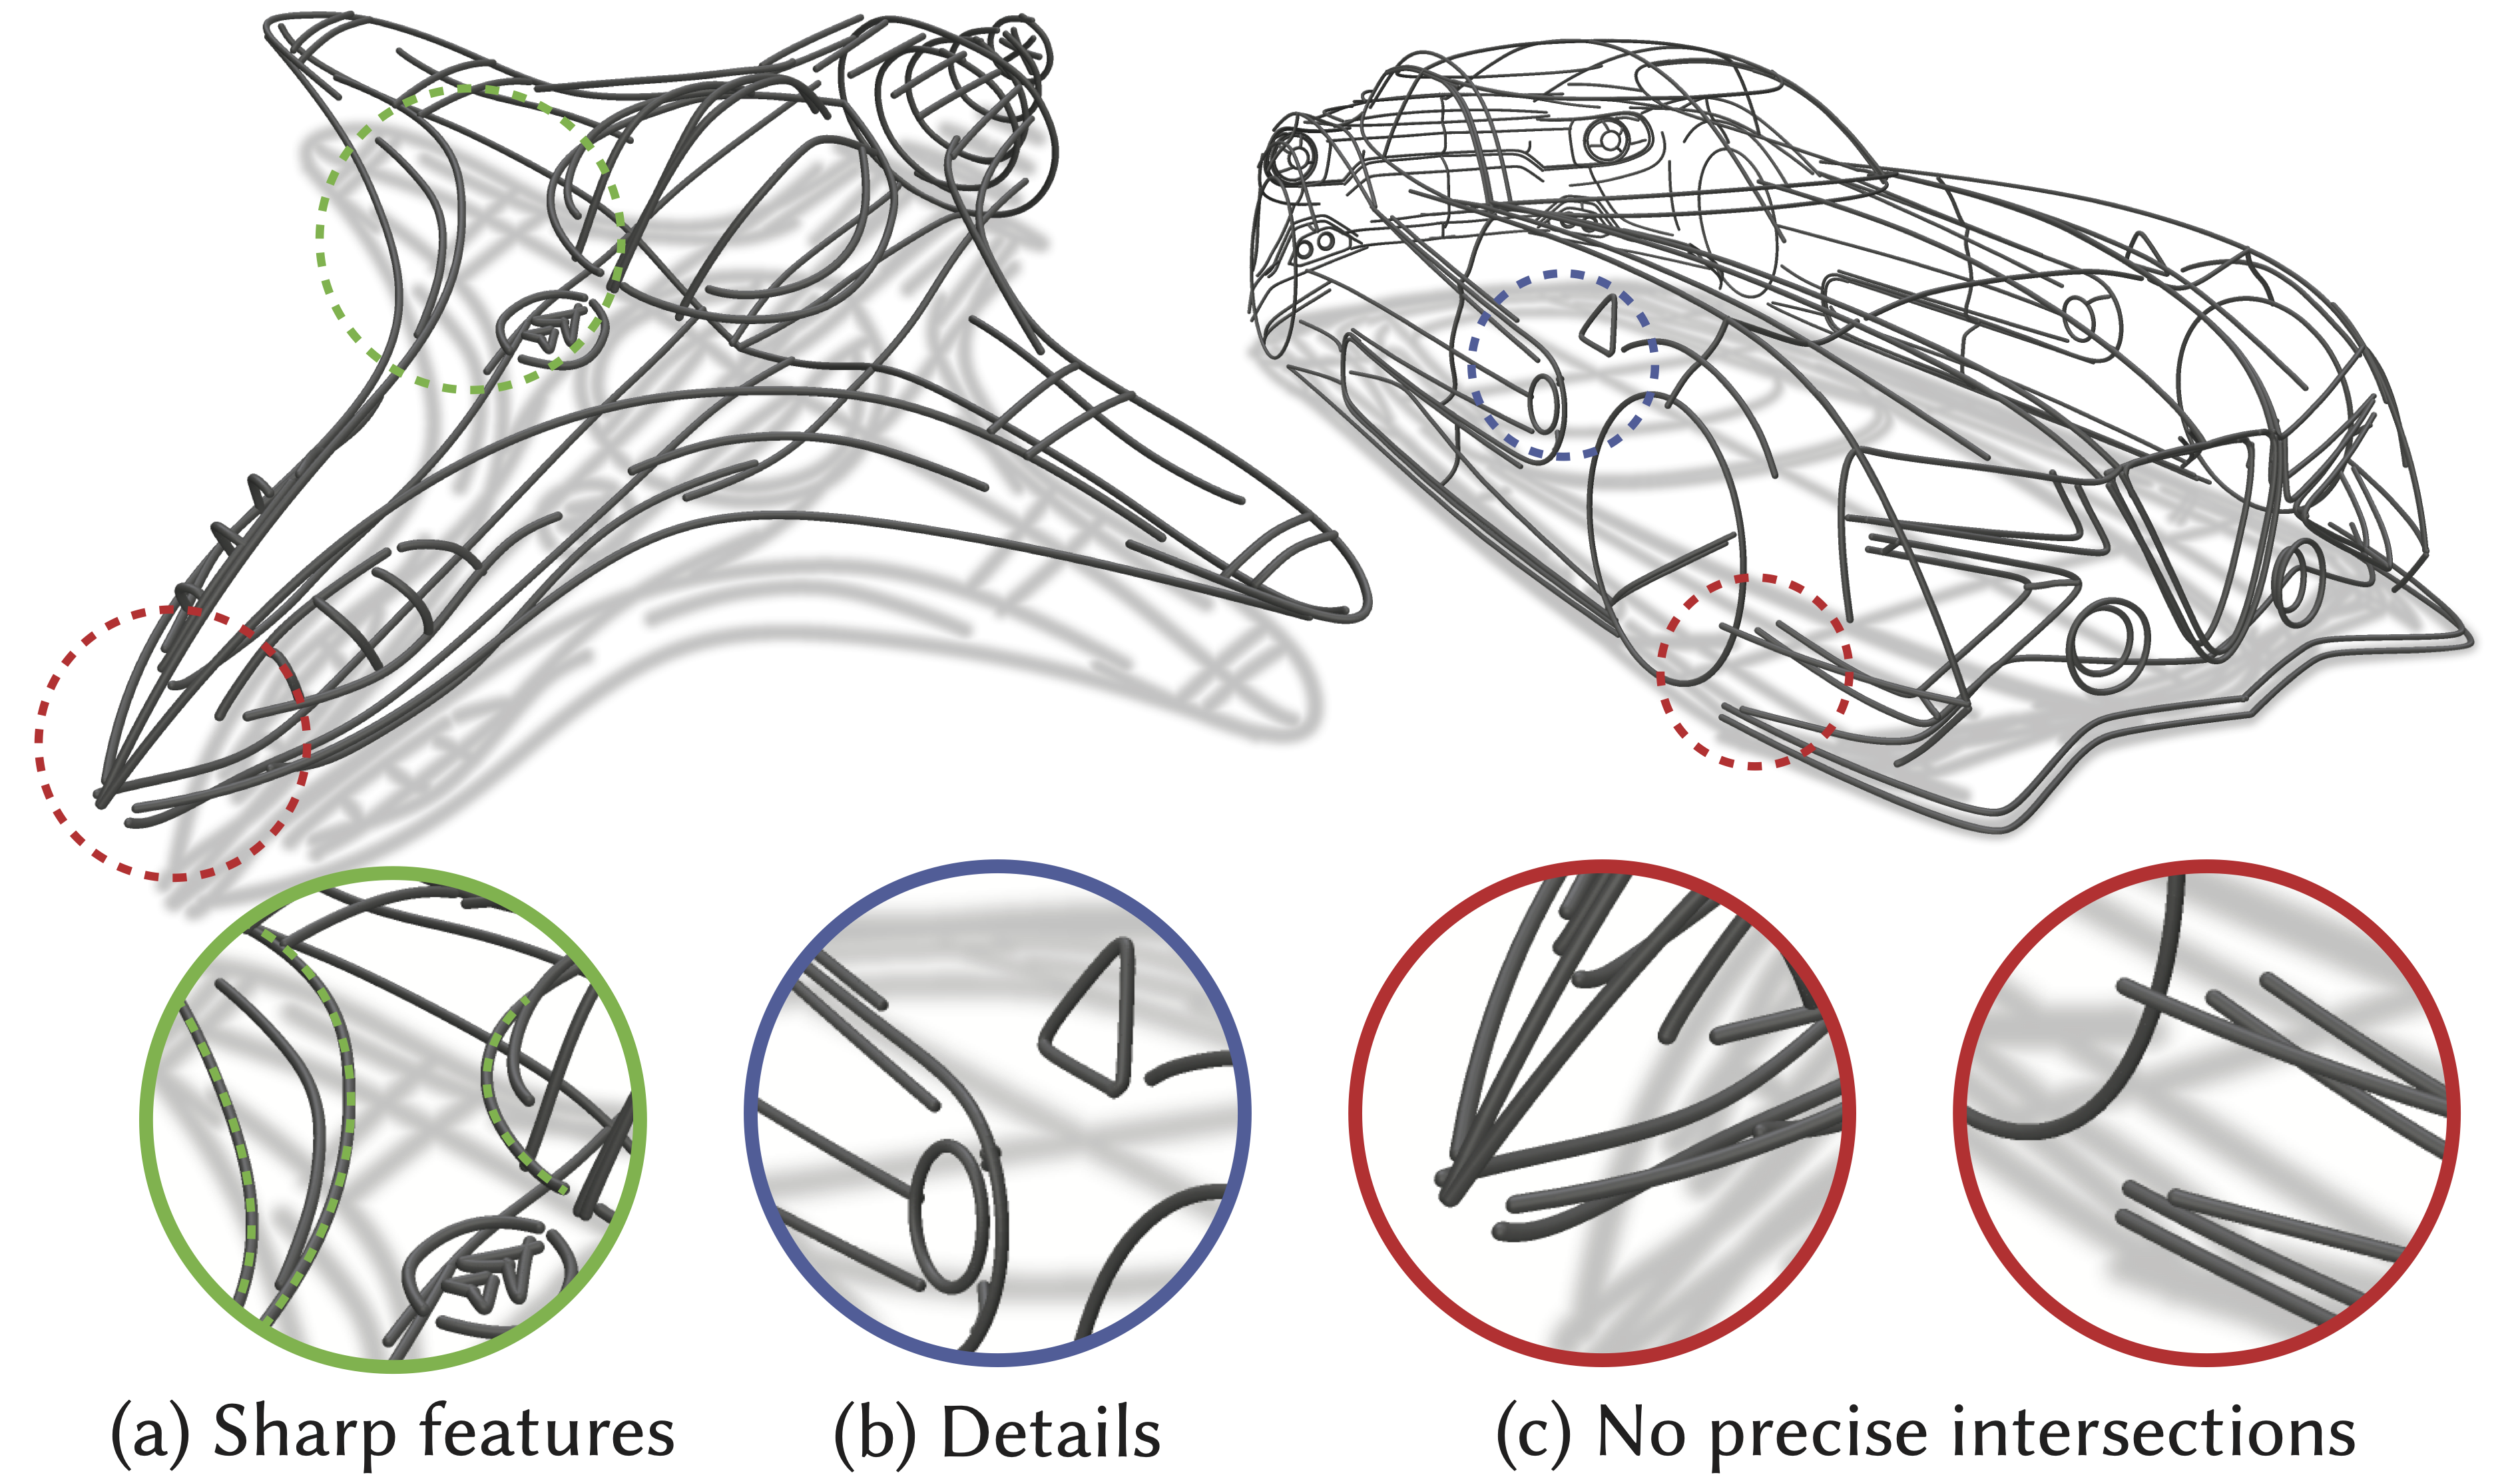 Fig. 1. 3D sketches done in VR (right,©James Robbins, used with permission).